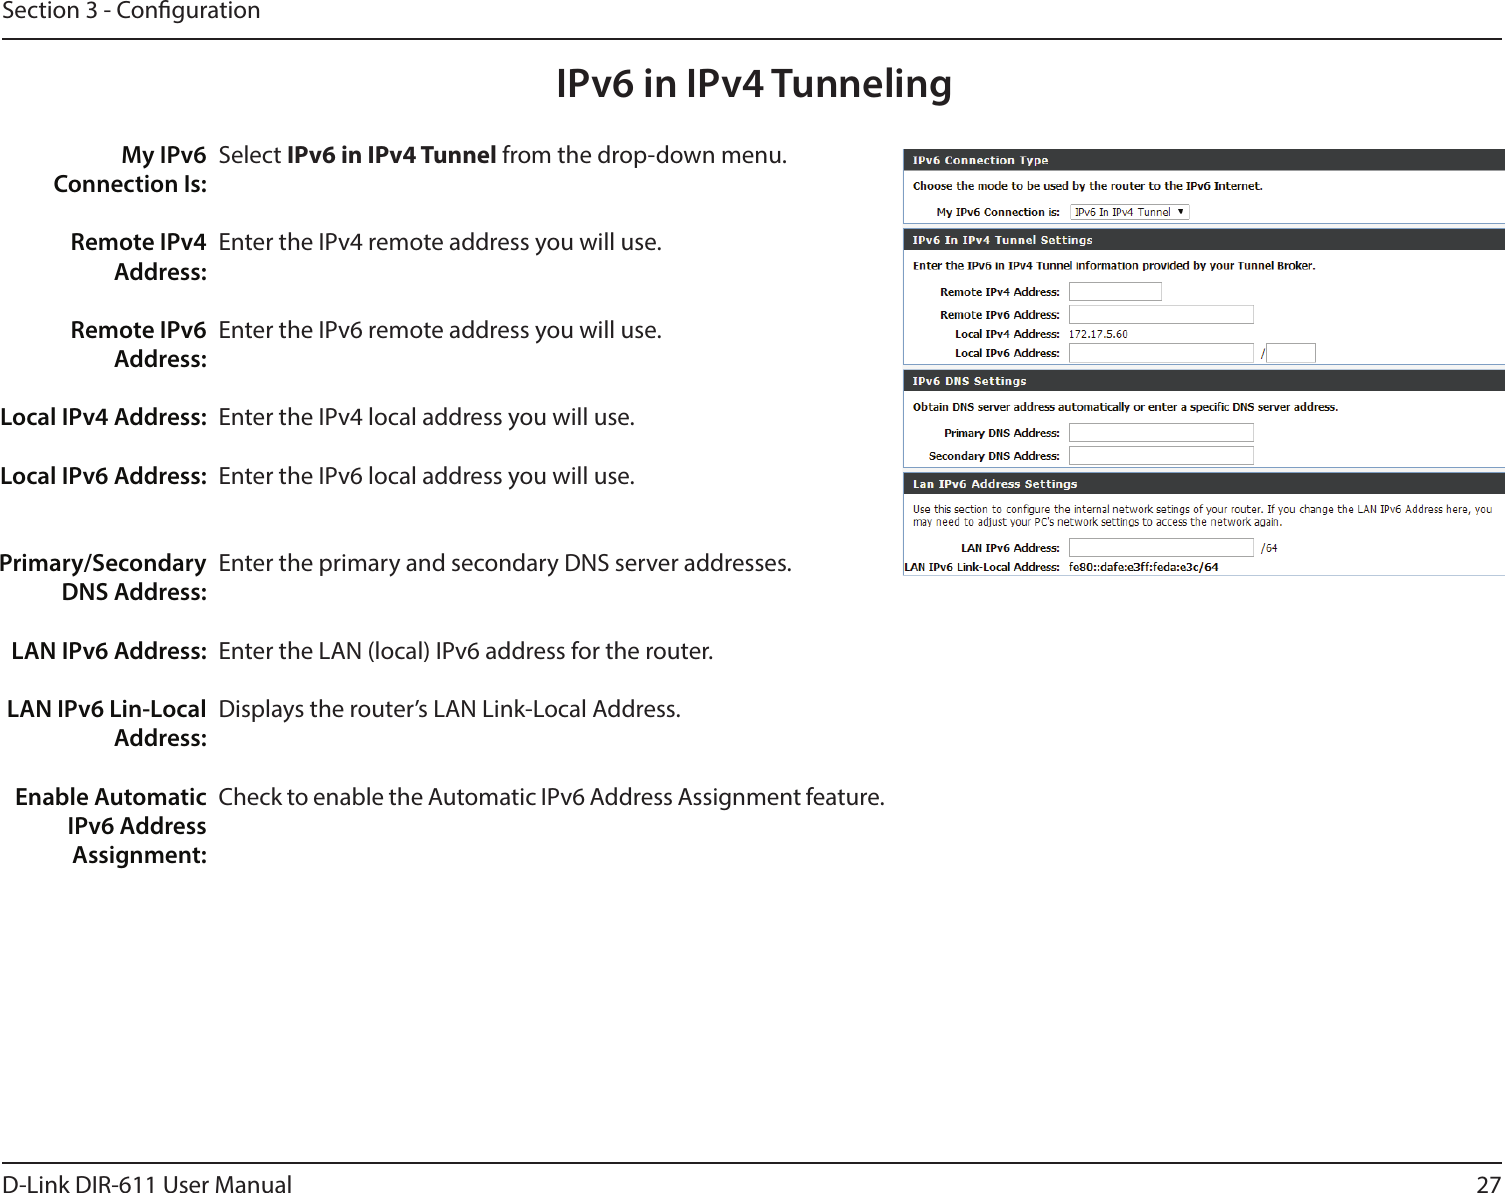 27D-Link DIR-611 User ManualSection 3 - CongurationIPv6 in IPv4 TunnelingSelect IPv6 in IPv4 Tunnel from the drop-down menu.Enter the IPv4 remote address you will use.Enter the IPv6 remote address you will use.Enter the IPv4 local address you will use.Enter the IPv6 local address you will use.Enter the primary and secondary DNS server addresses.Enter the LAN (local) IPv6 address for the router. Displays the router’s LAN Link-Local Address.Check to enable the Automatic IPv6 Address Assignment feature.My IPv6 Connection Is:Remote IPv4 Address:Remote IPv6 Address:Local IPv4 Address:Local IPv6 Address:Primary/Secondary DNS Address:LAN IPv6 Address:LAN IPv6 Lin-Local Address:Enable Automatic IPv6 AddressAssignment: